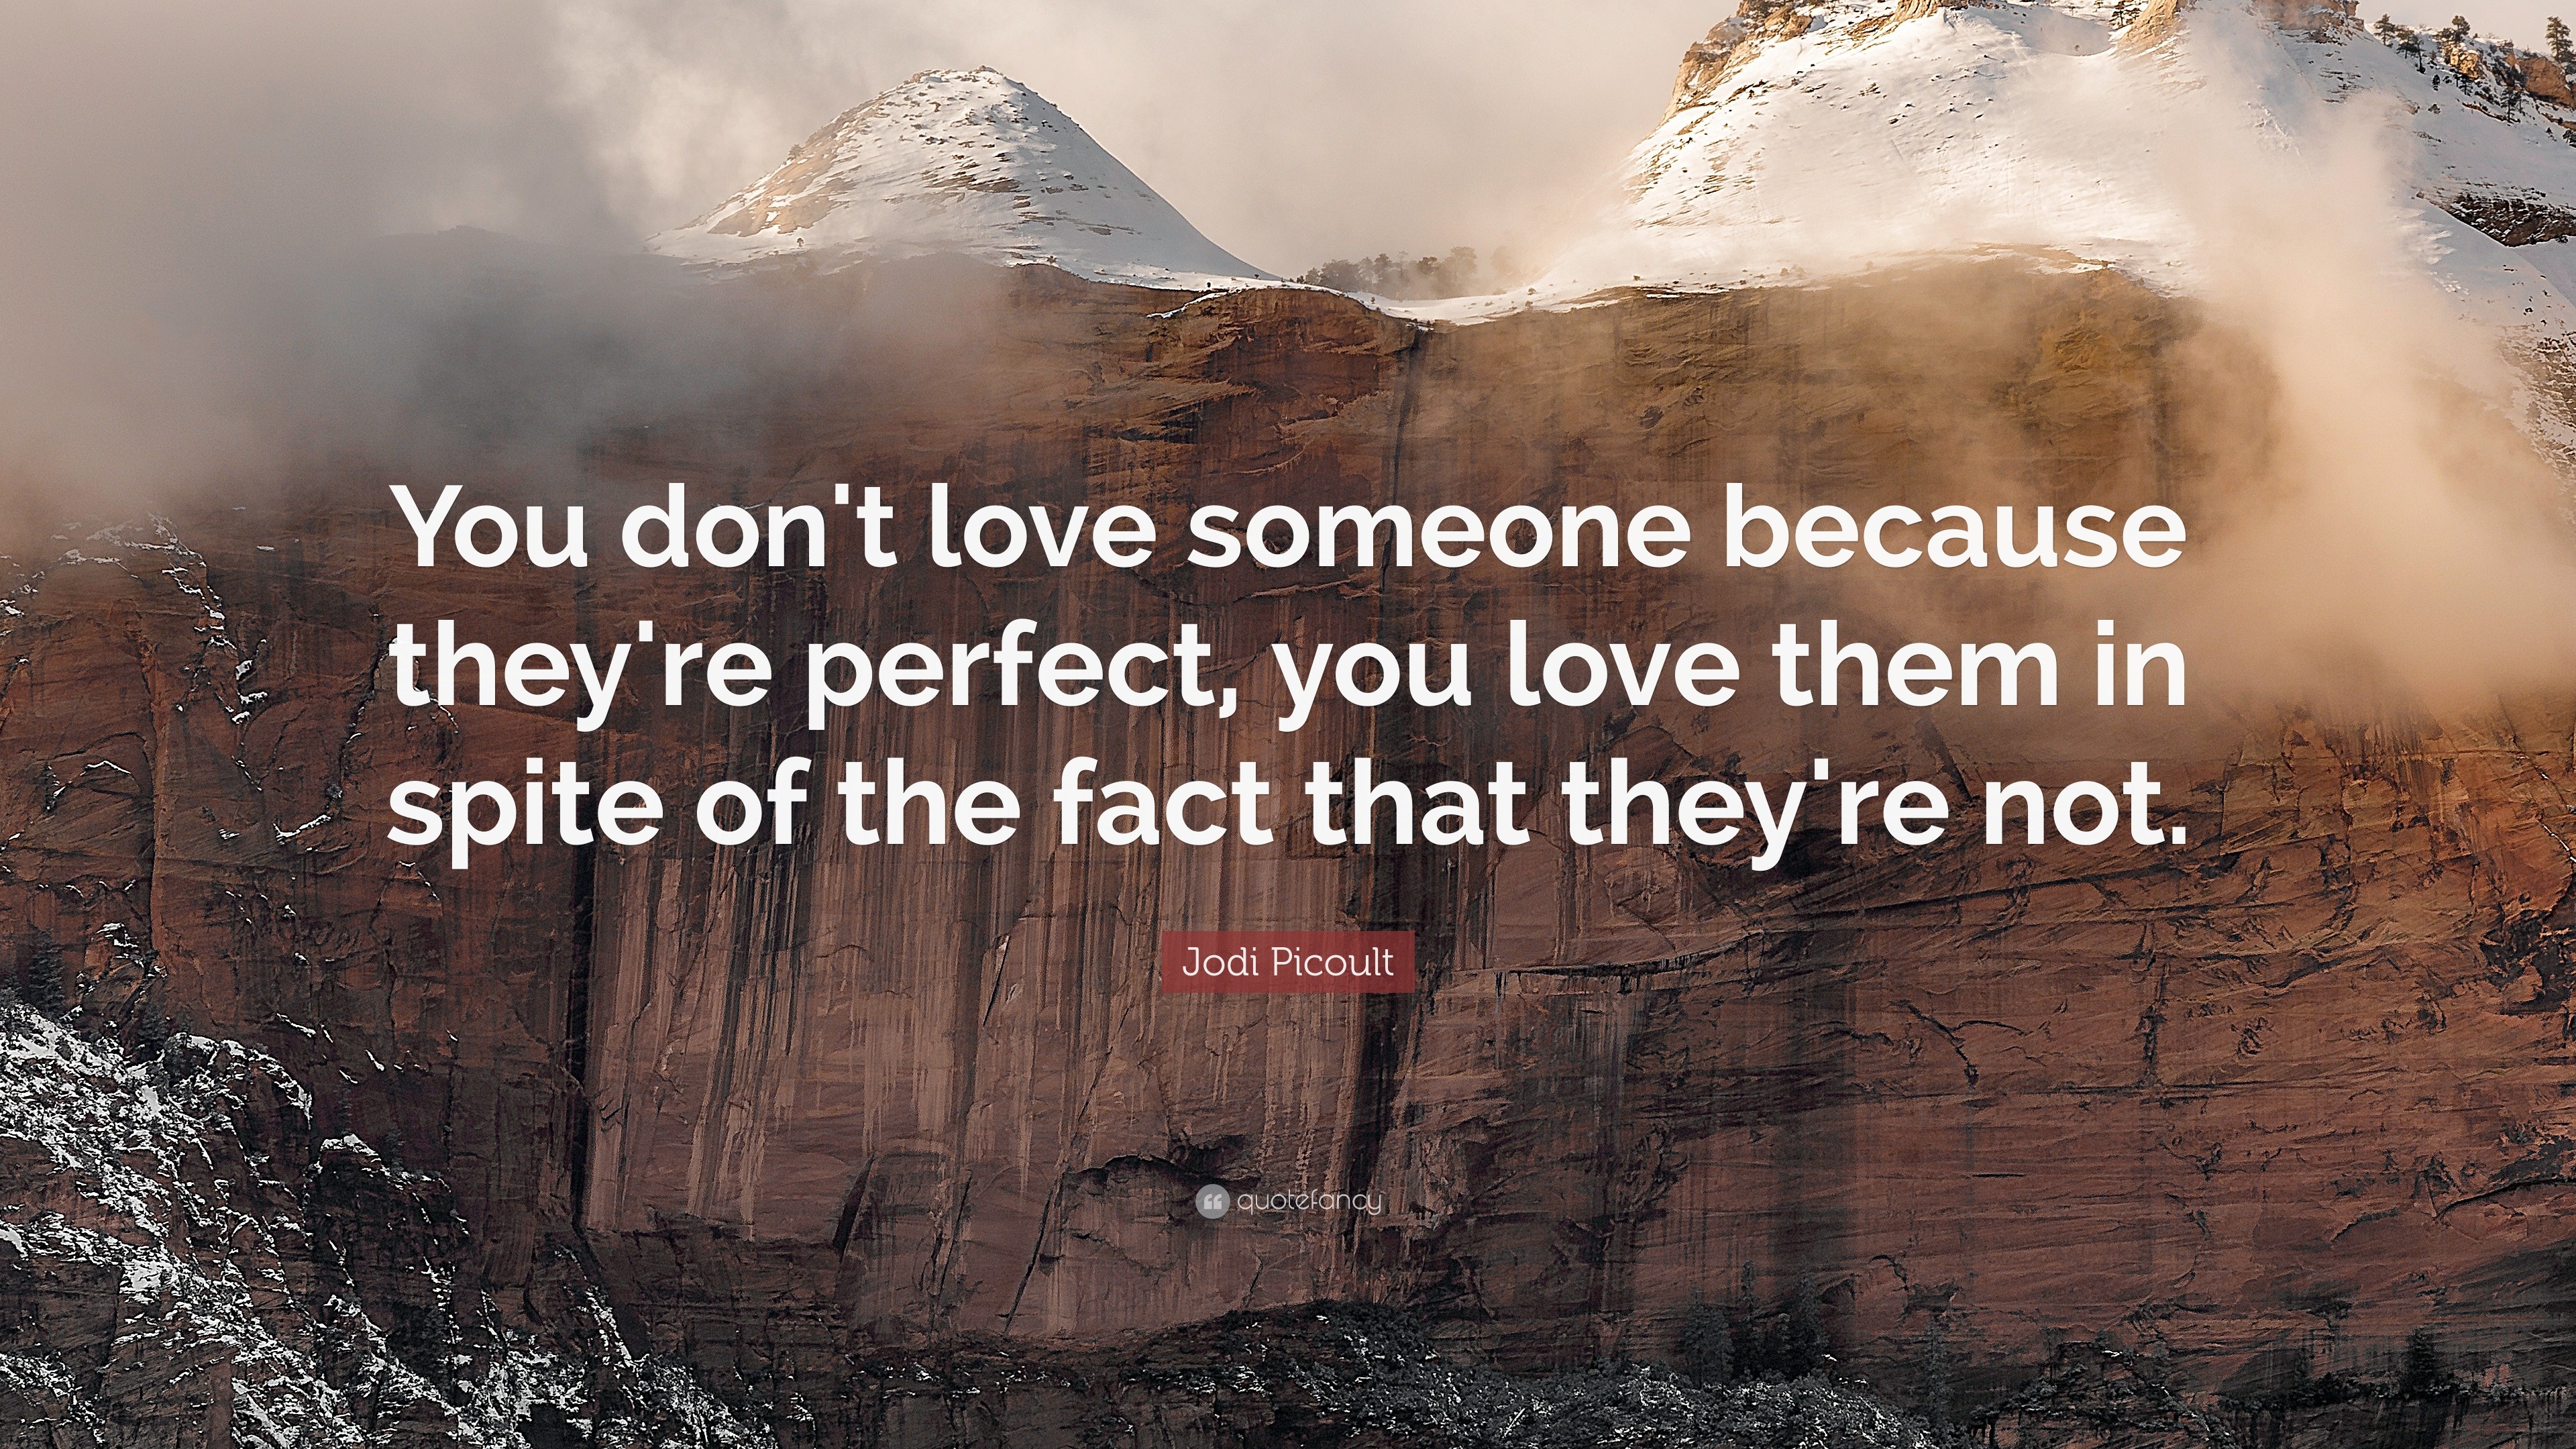 Jodi Picoult Quote “You don t love someone because they re perfect